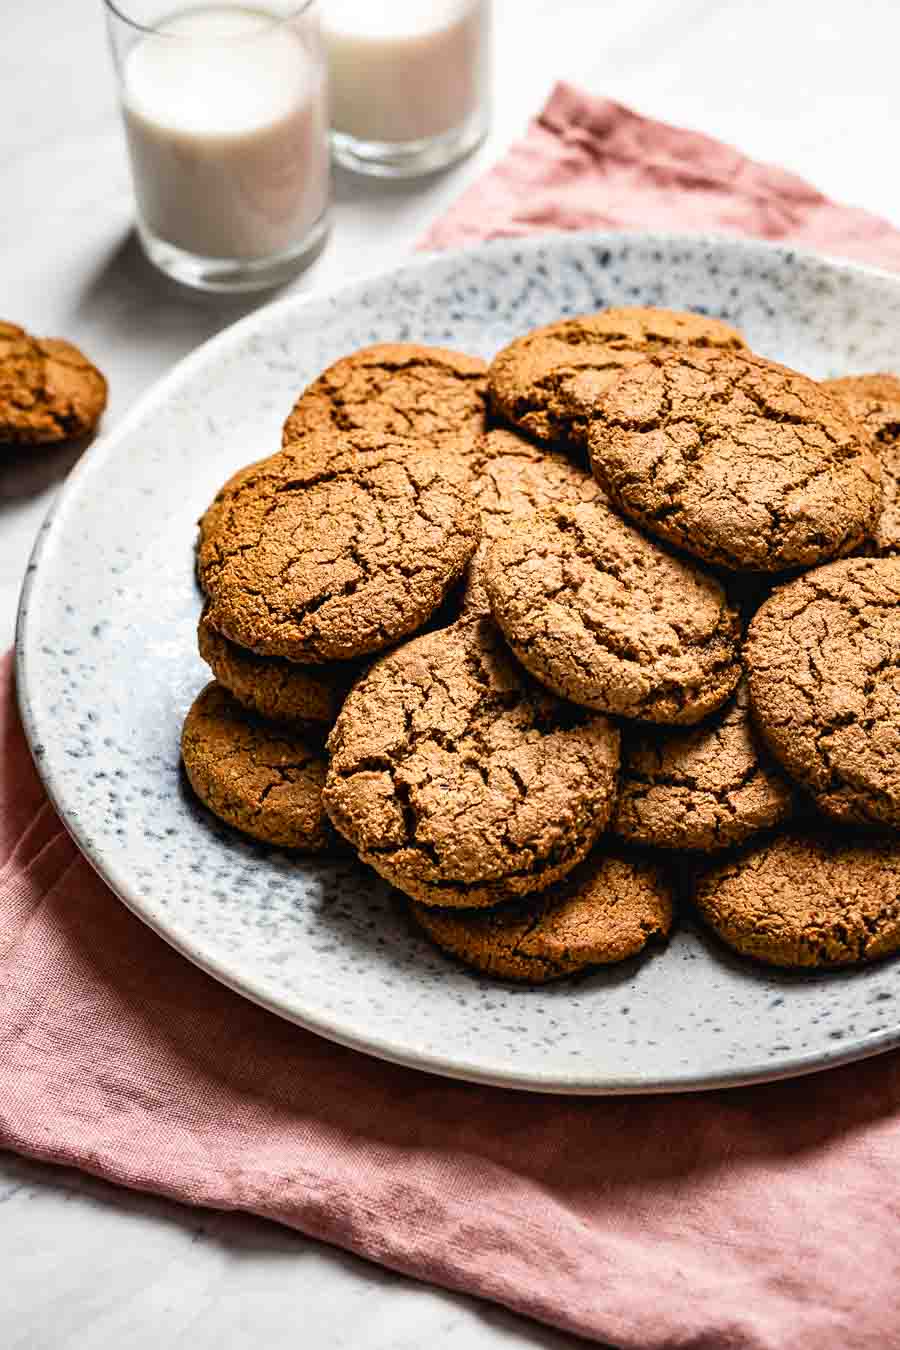 Gingerbread Cookies with almond flour on a plate.